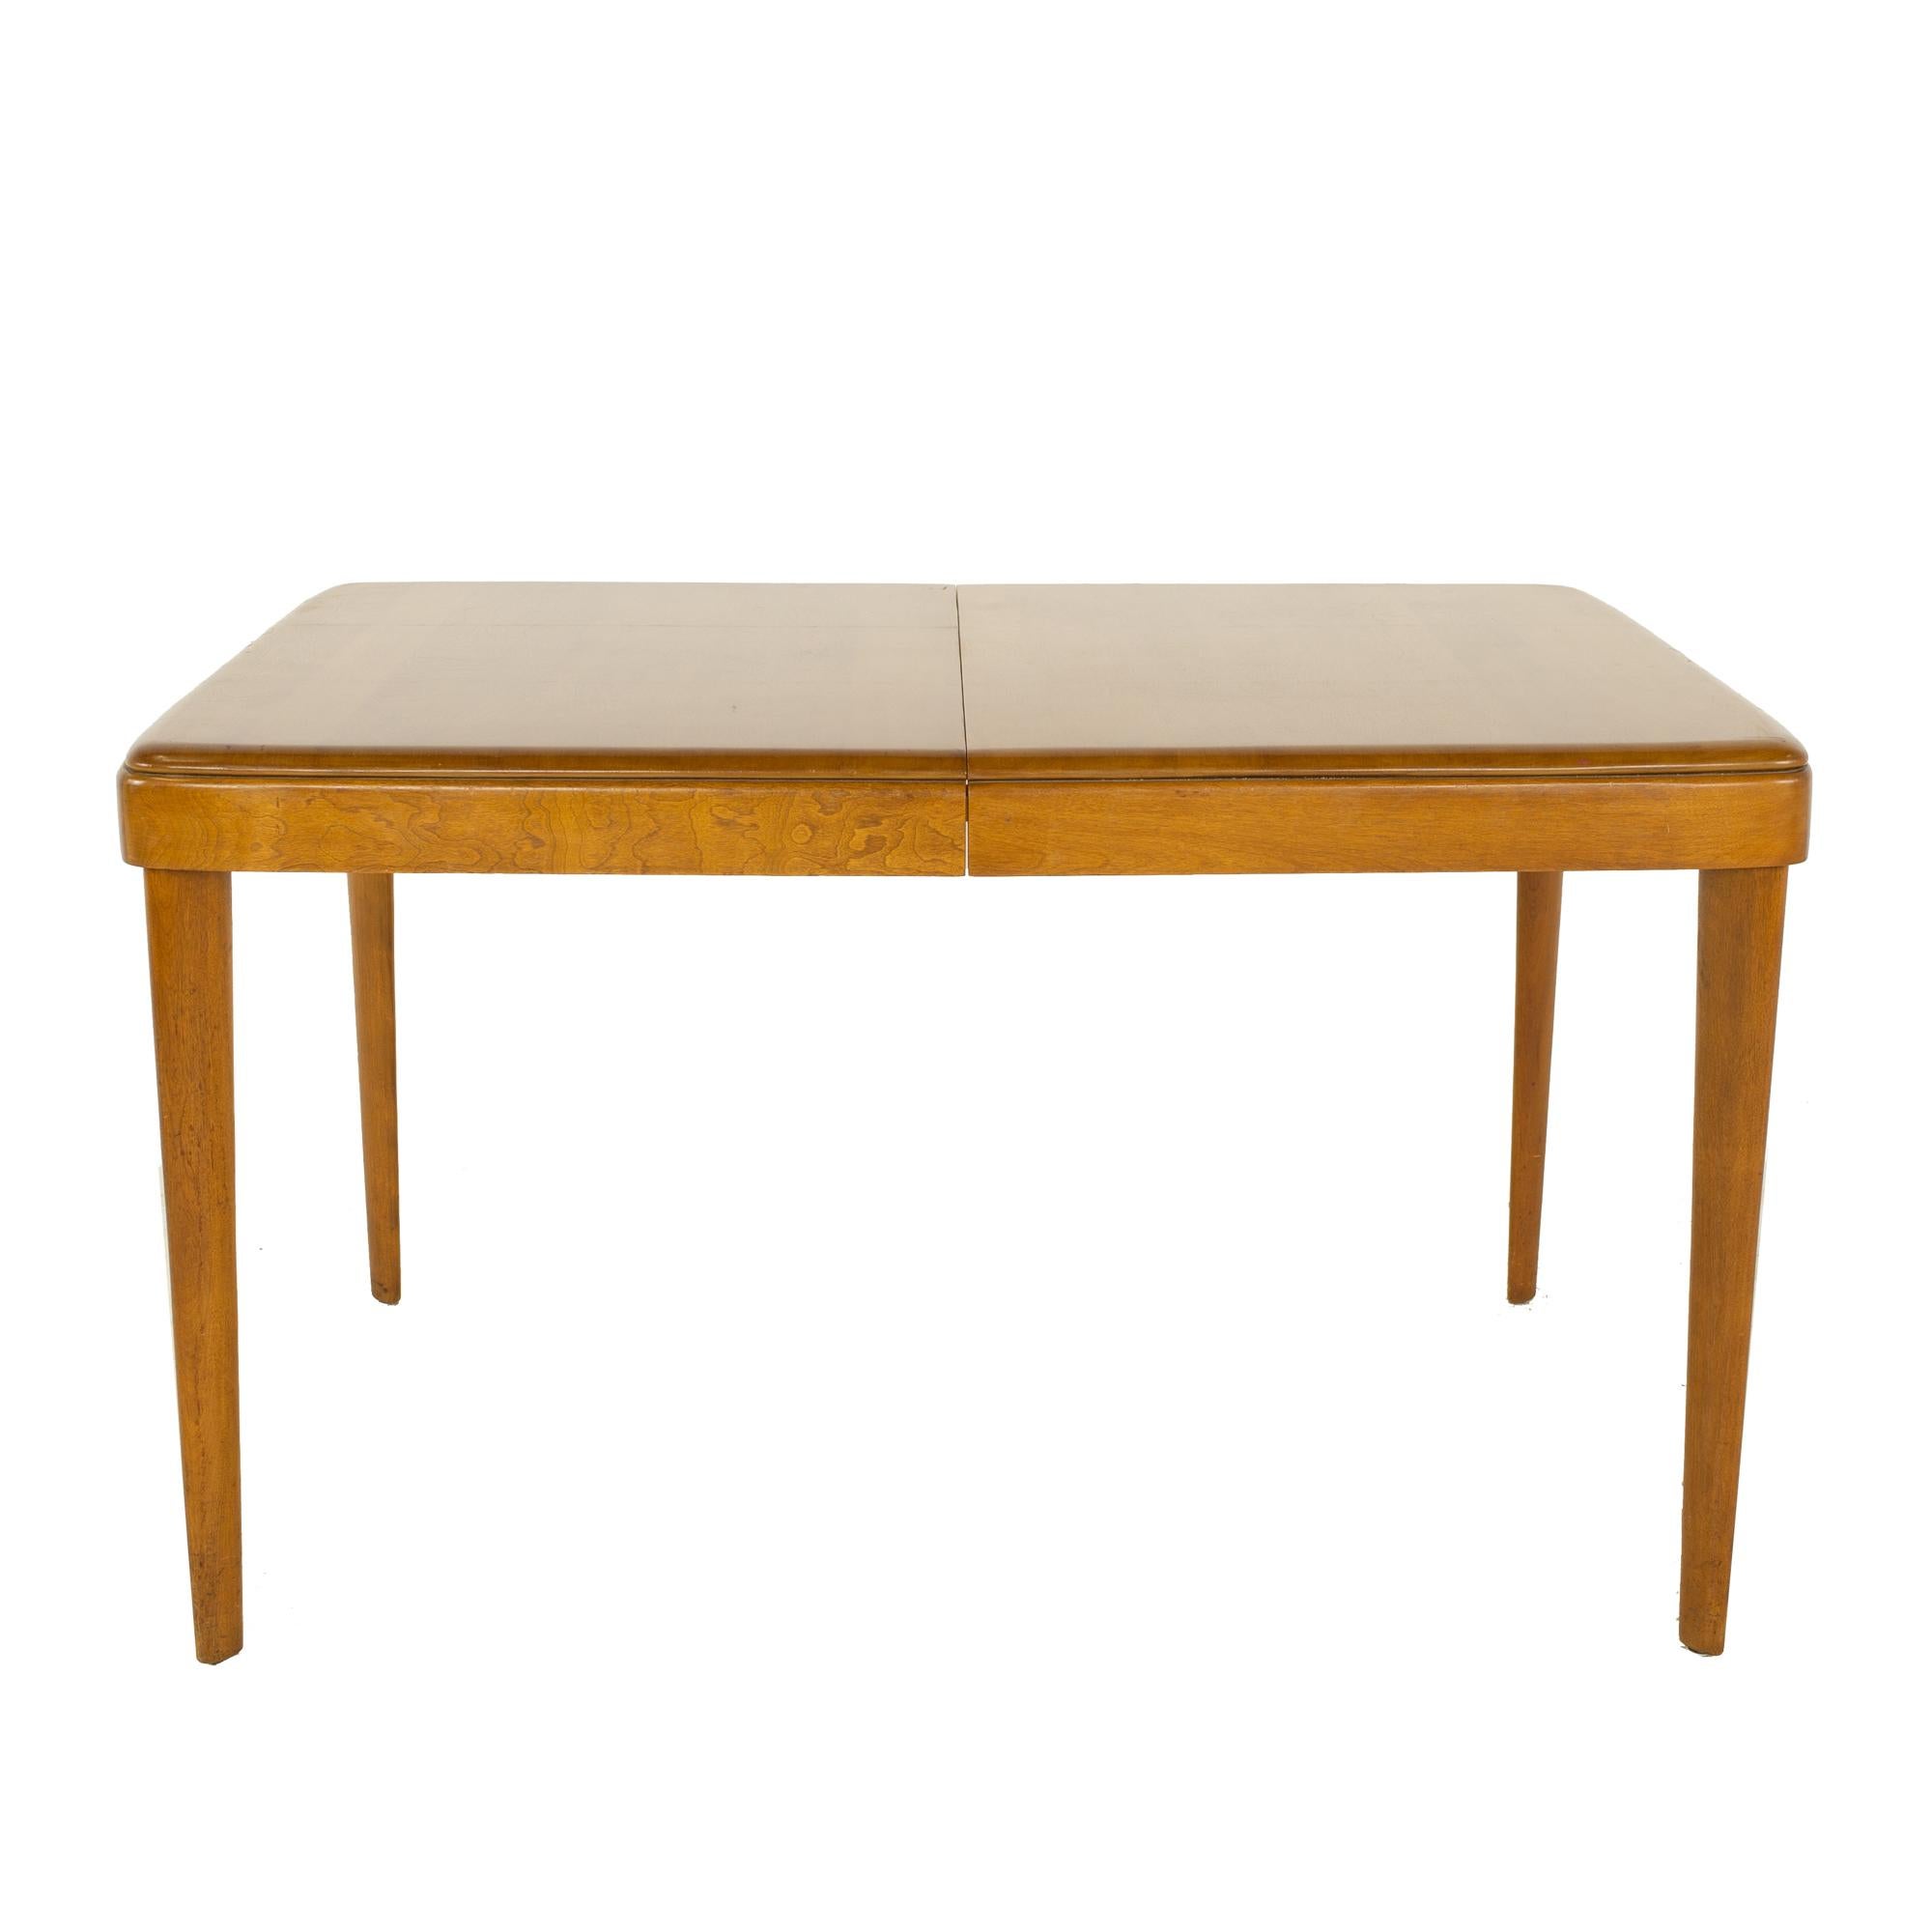 Heywood Wakefield mid century dining table

Table measures: 50 wide x 34 deep x 29.5 inches high

All pieces of furniture can be had in what we call restored vintage condition. That means the piece is restored upon purchase so it’s free of